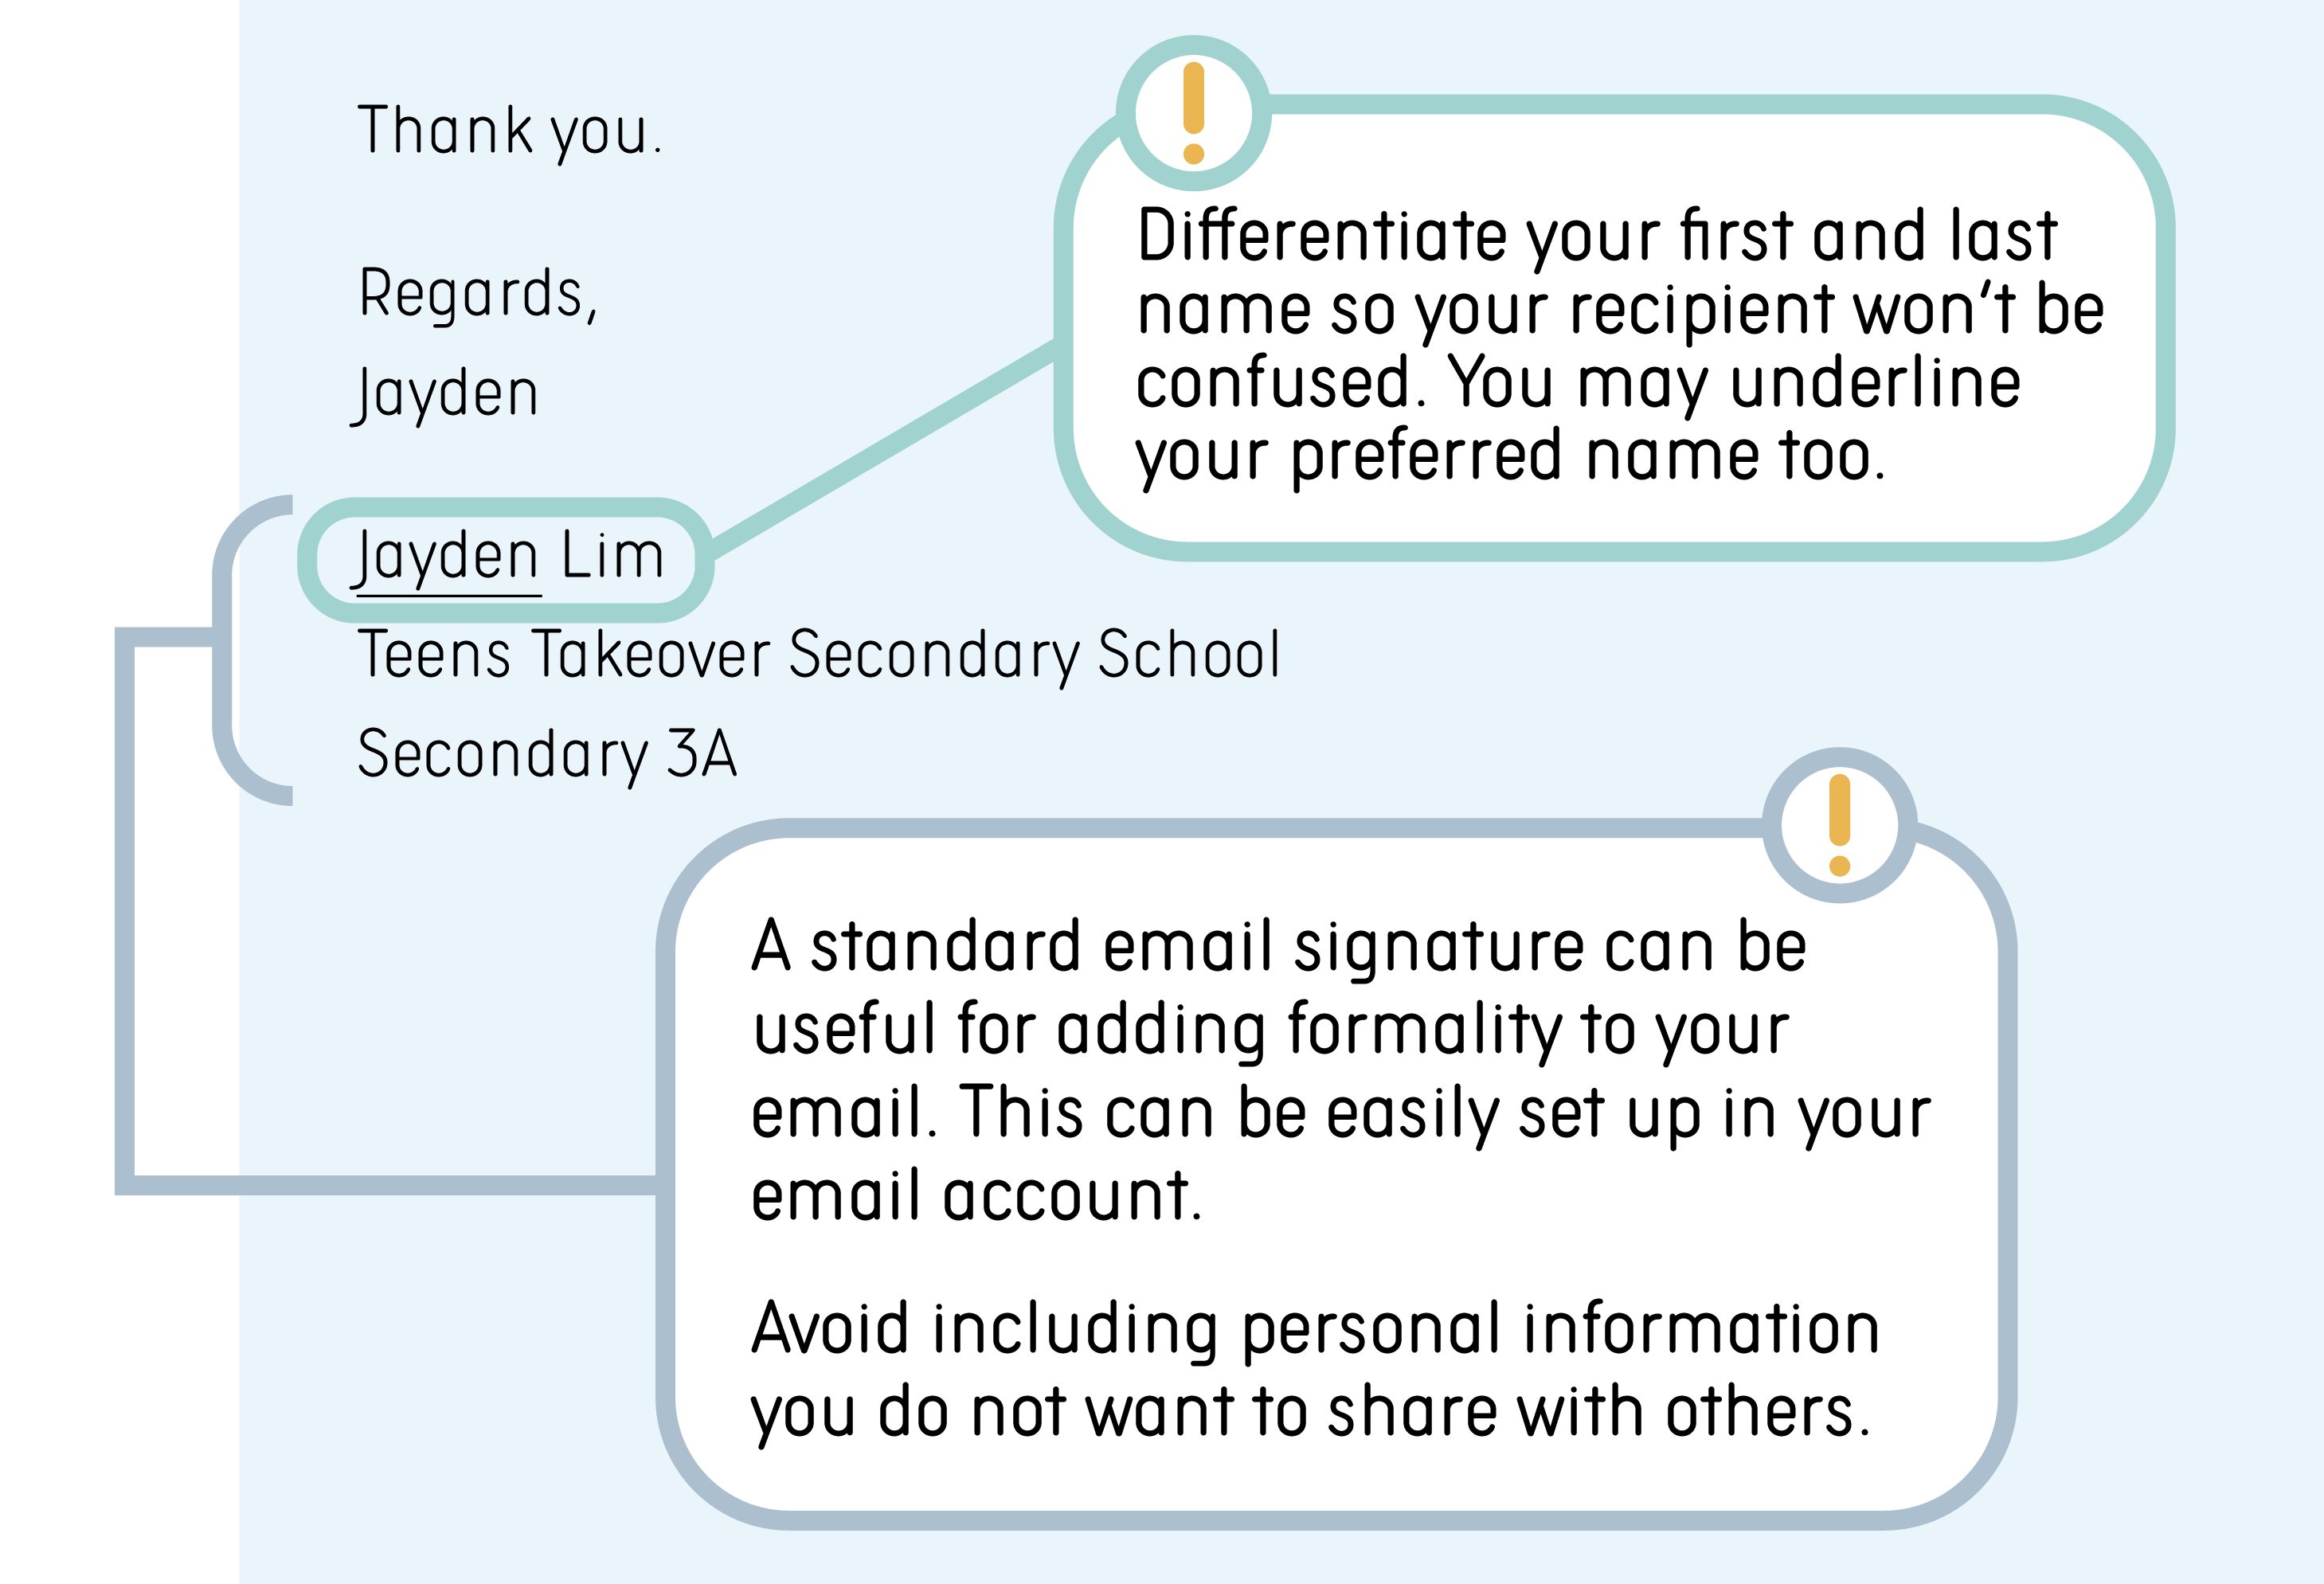 Tips: A standard email signature can be useful for adding formality to your email. This can be easily set up in your email account. Differentiate your first and last name so your recipient won’t be confused. You may underline your preferred name too. Avoid including personal information that you do not want to share with others. Example: Regards, Jayden. Jayden Lim. Teens Takeover Secondary School. Secondary 3A.